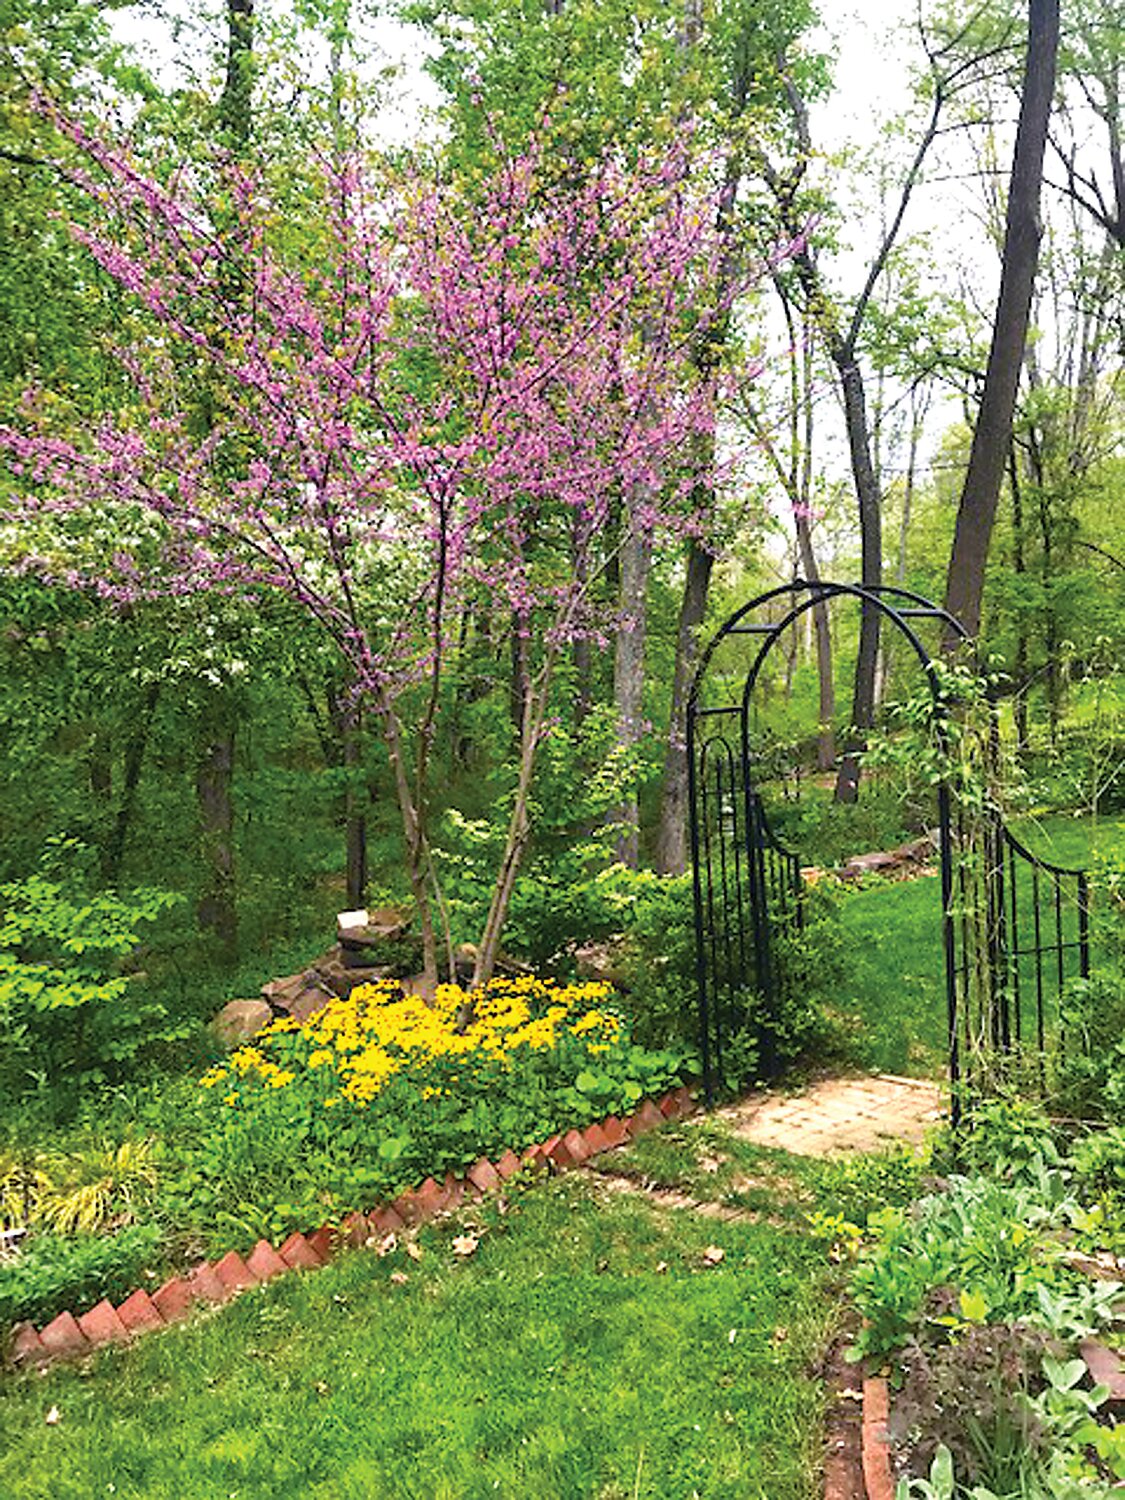 This garden path was featured on a previous “designed for Nature” Garden Tour. The tour, showcasing native plants, returns June 17.